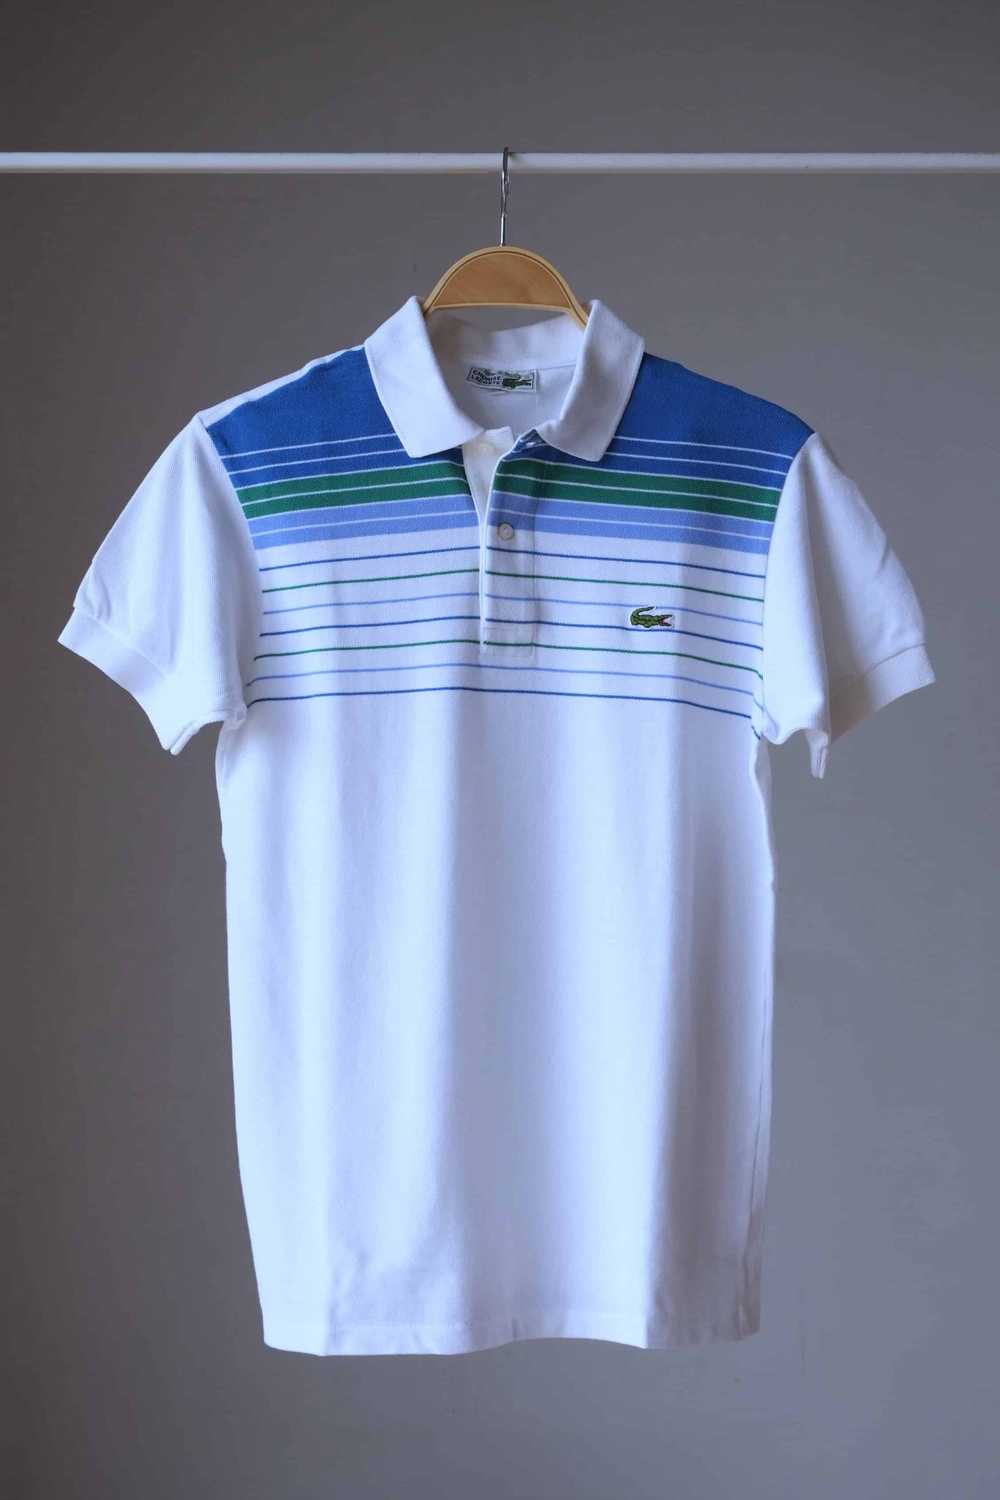 LACOSTE Vintage Striped Polo - image 1